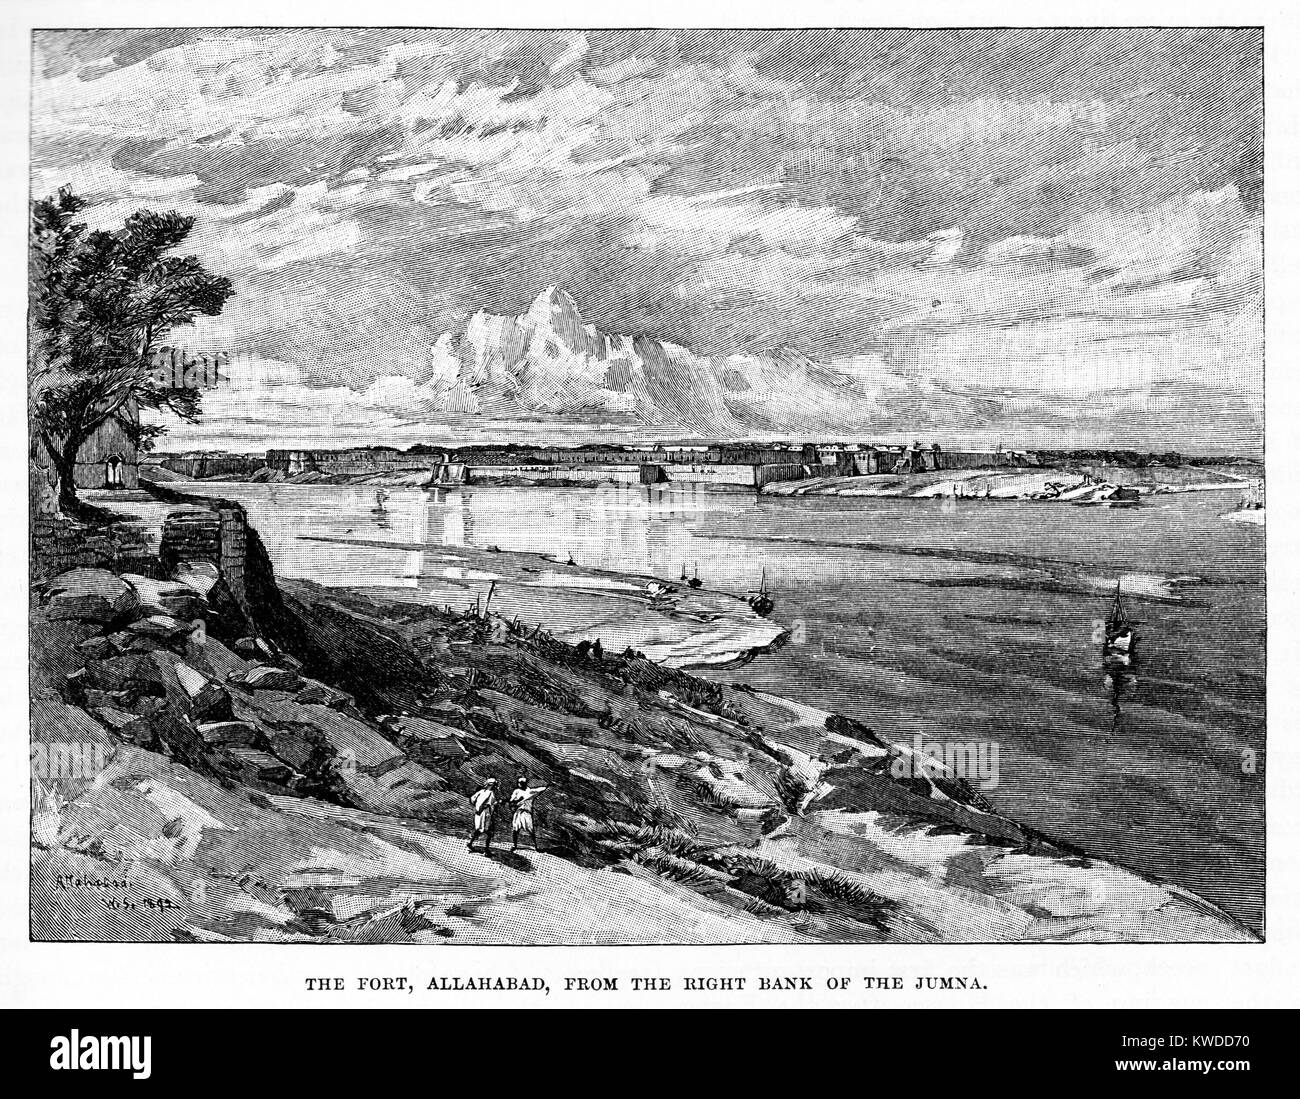 The Fort, Allahabad from the right bank of the Jumna River; 19th century black and white engraving Stock Photo